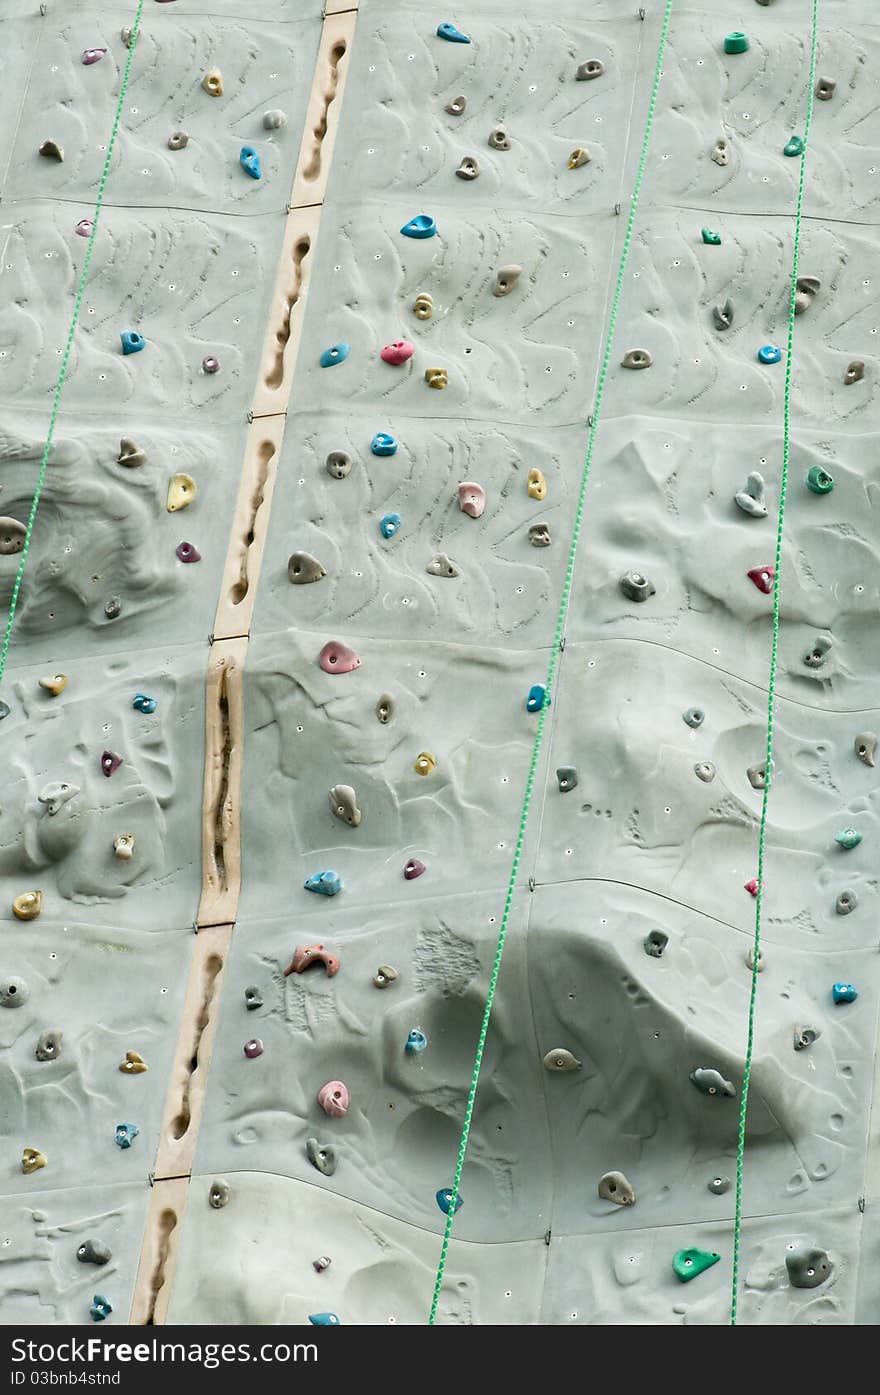 A portrait of climbing wall with hand grips and ropes